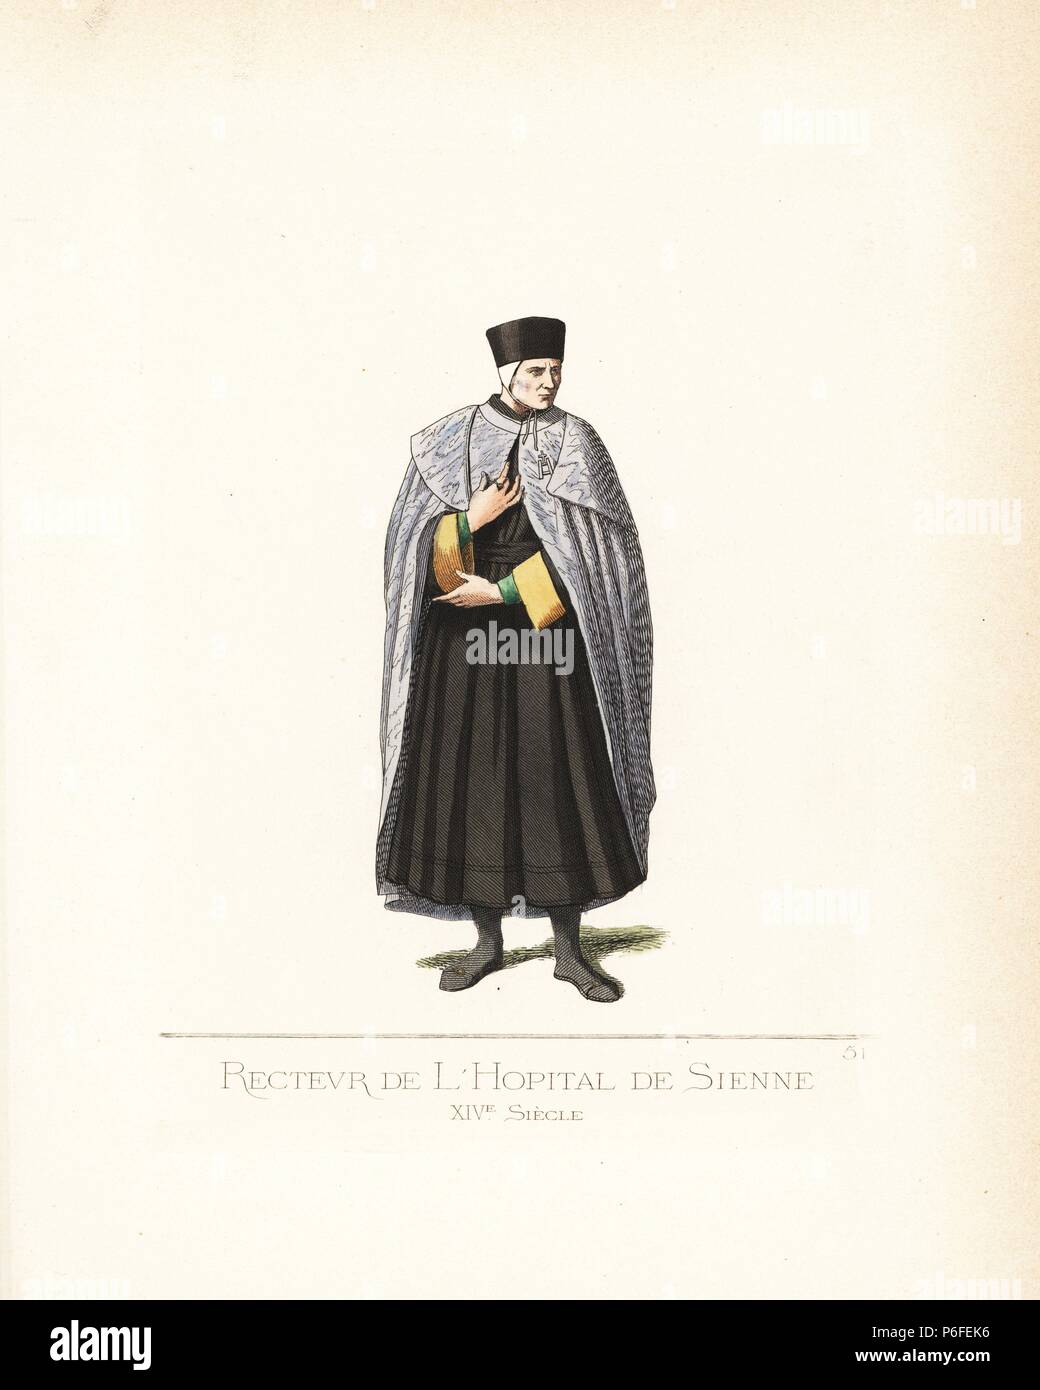 Rector of the hospital of Santa Maria della Scala, Siena, 14th century. He wears a black toque over a white cap, violet silk cape, black robe with yellow cuffs, green doublet, and black shoes. From a fresco 'Healing the Sick' by Domenico di Bartolo. Handcoloured illustration drawn and lithographed by Paul Mercuri with text by Camille Bonnard from 'Historical Costumes from the 12th to 15th Centuries,' Levy Fils, Paris, 1860. Stock Photo